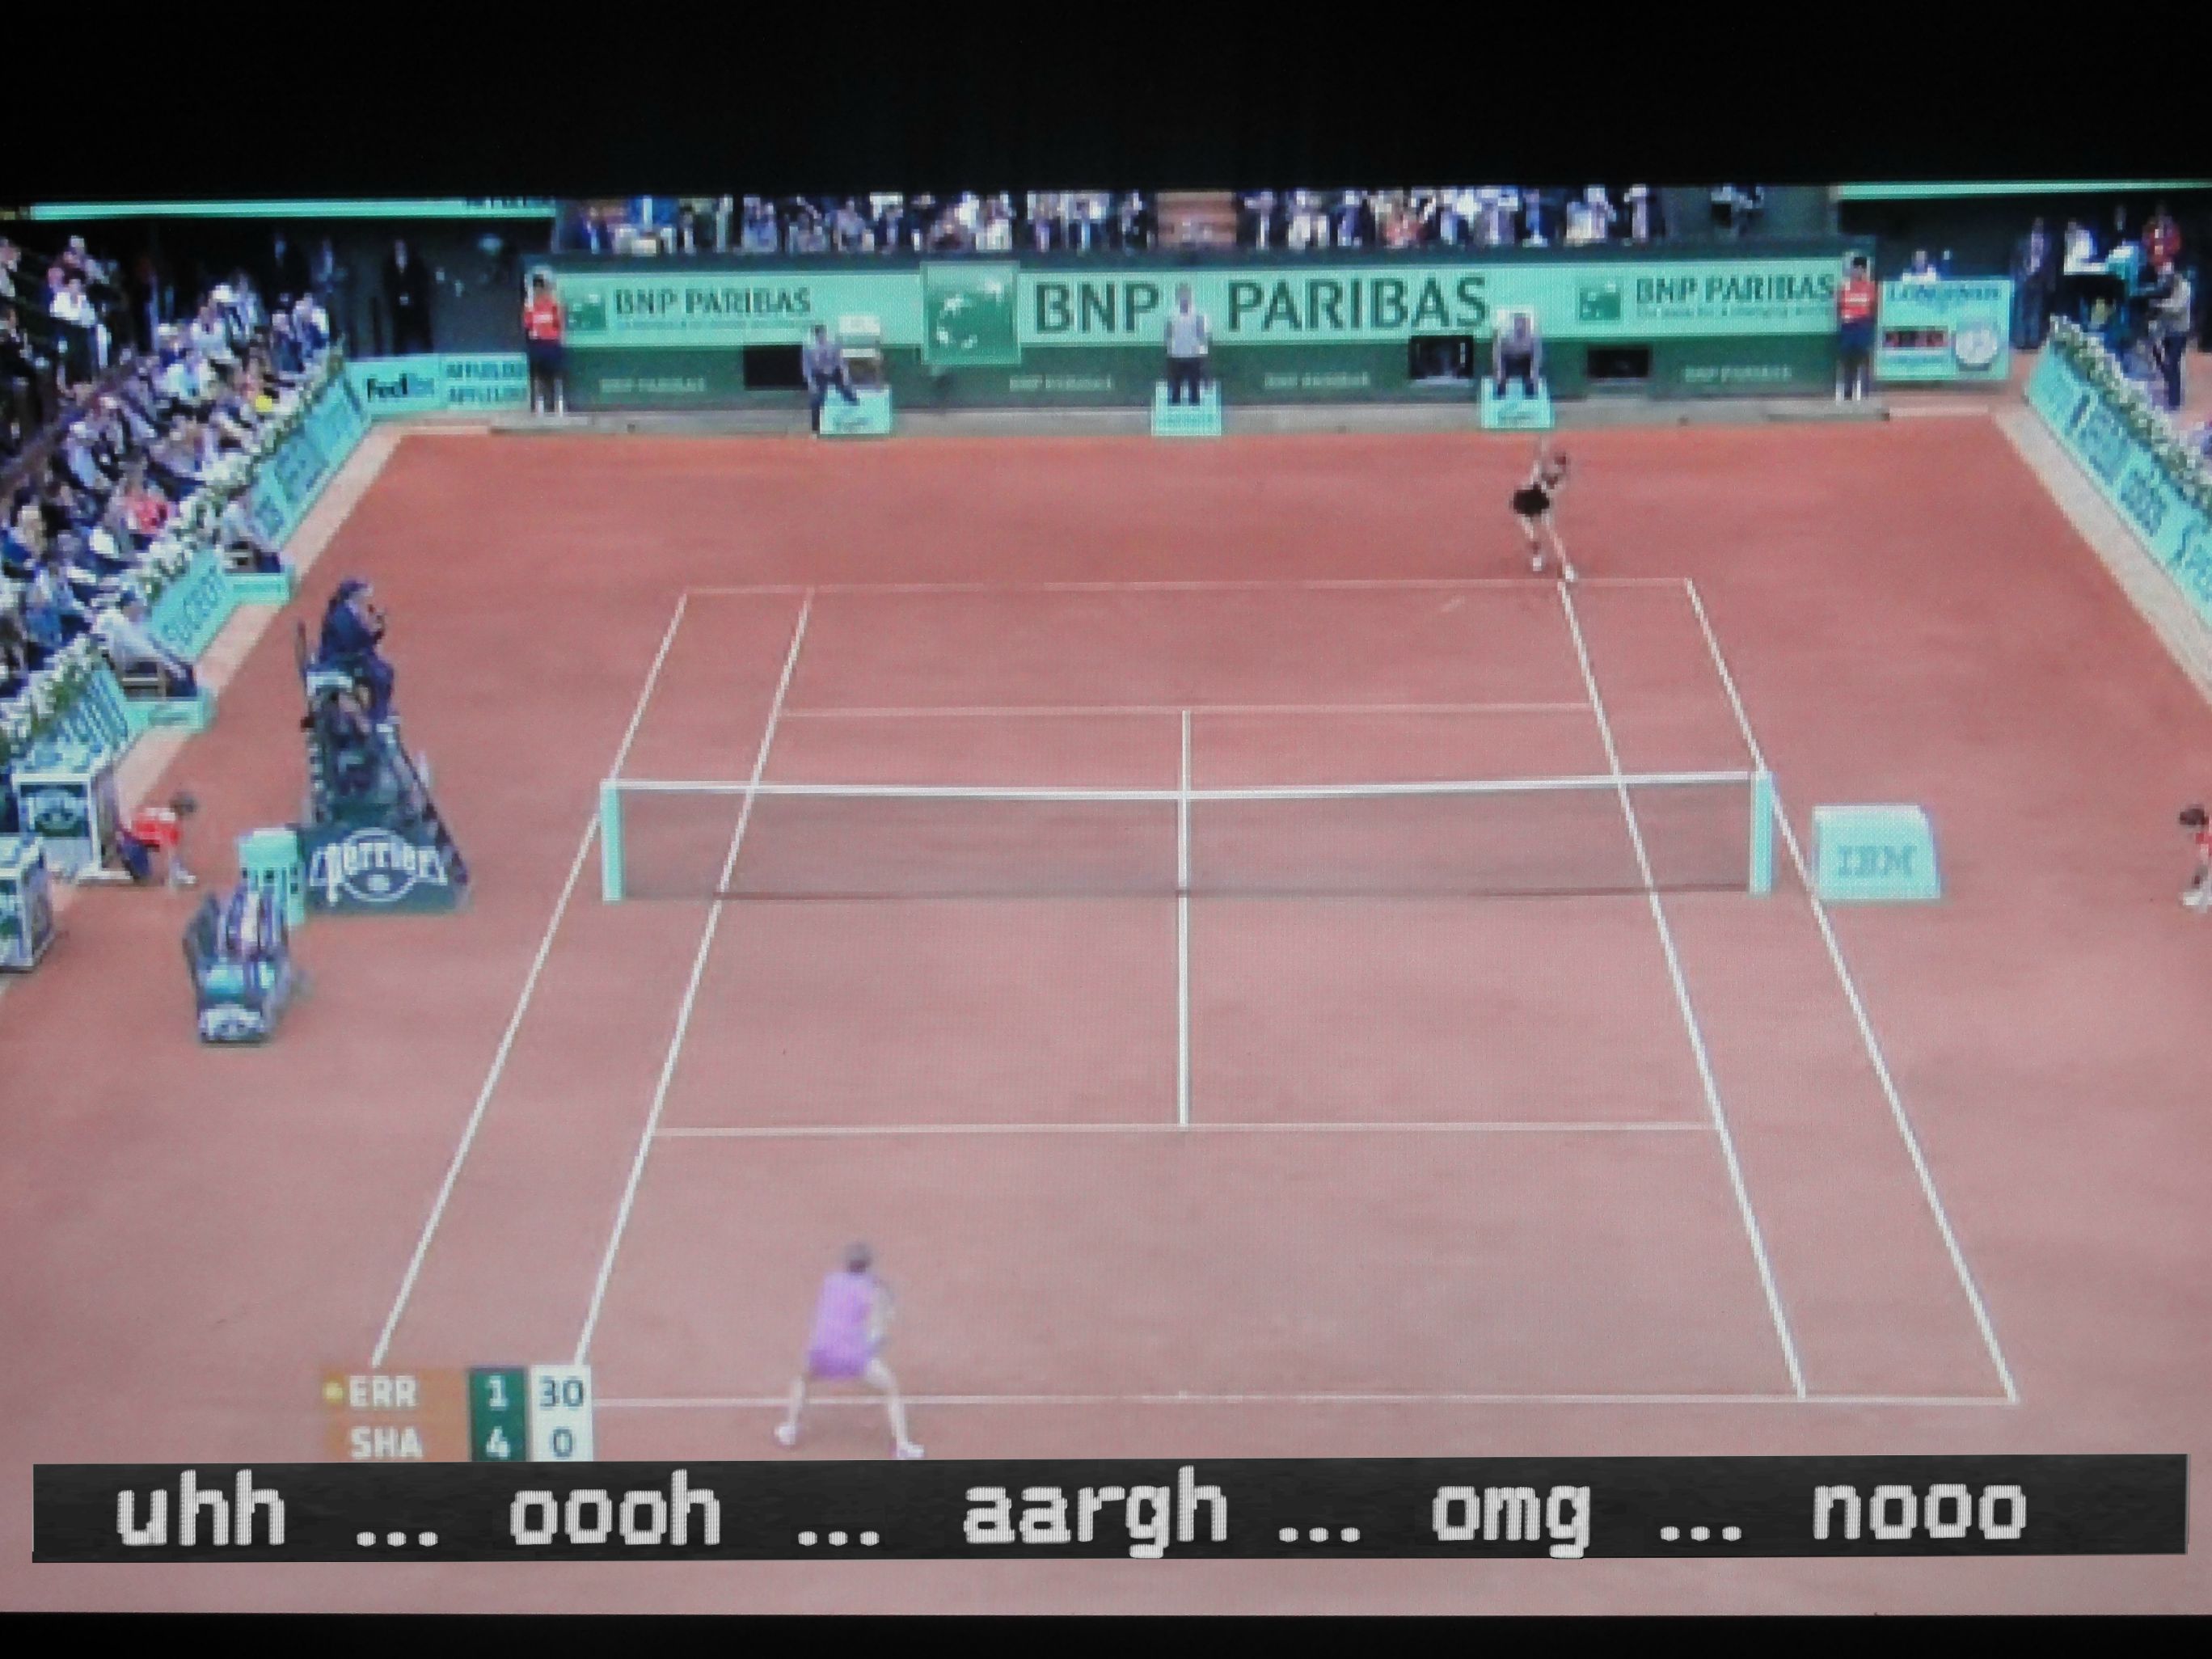 And then i turned on the subtitles during the women's final...